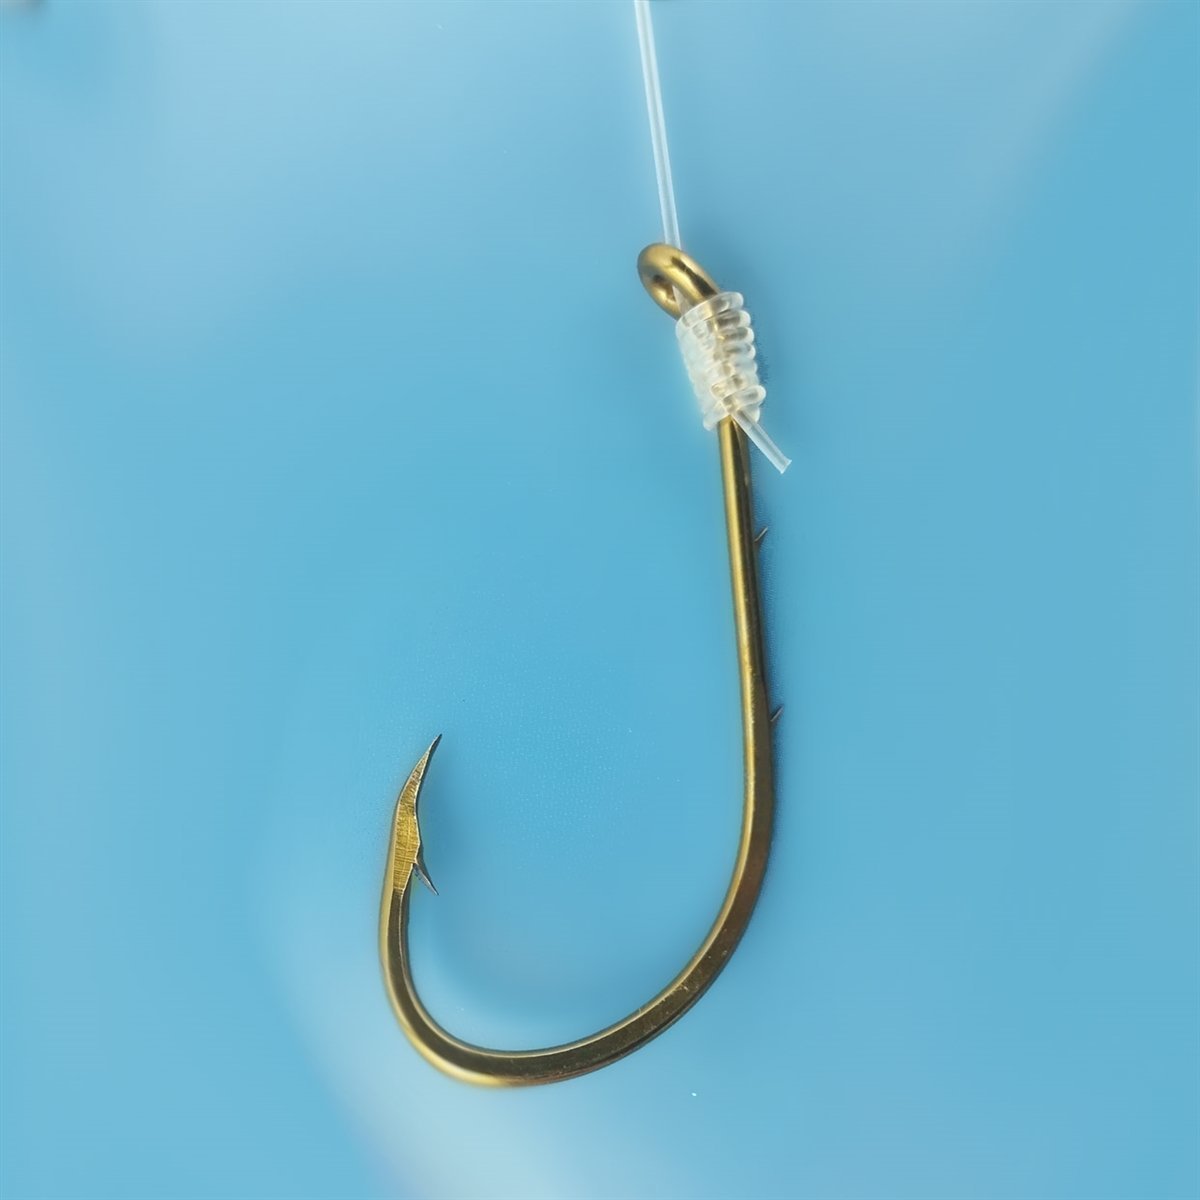 Tide Rite Saltwater Snelled Hooks for Striped Bass - BRONZE - 6 PACK - s-->Size 8/0